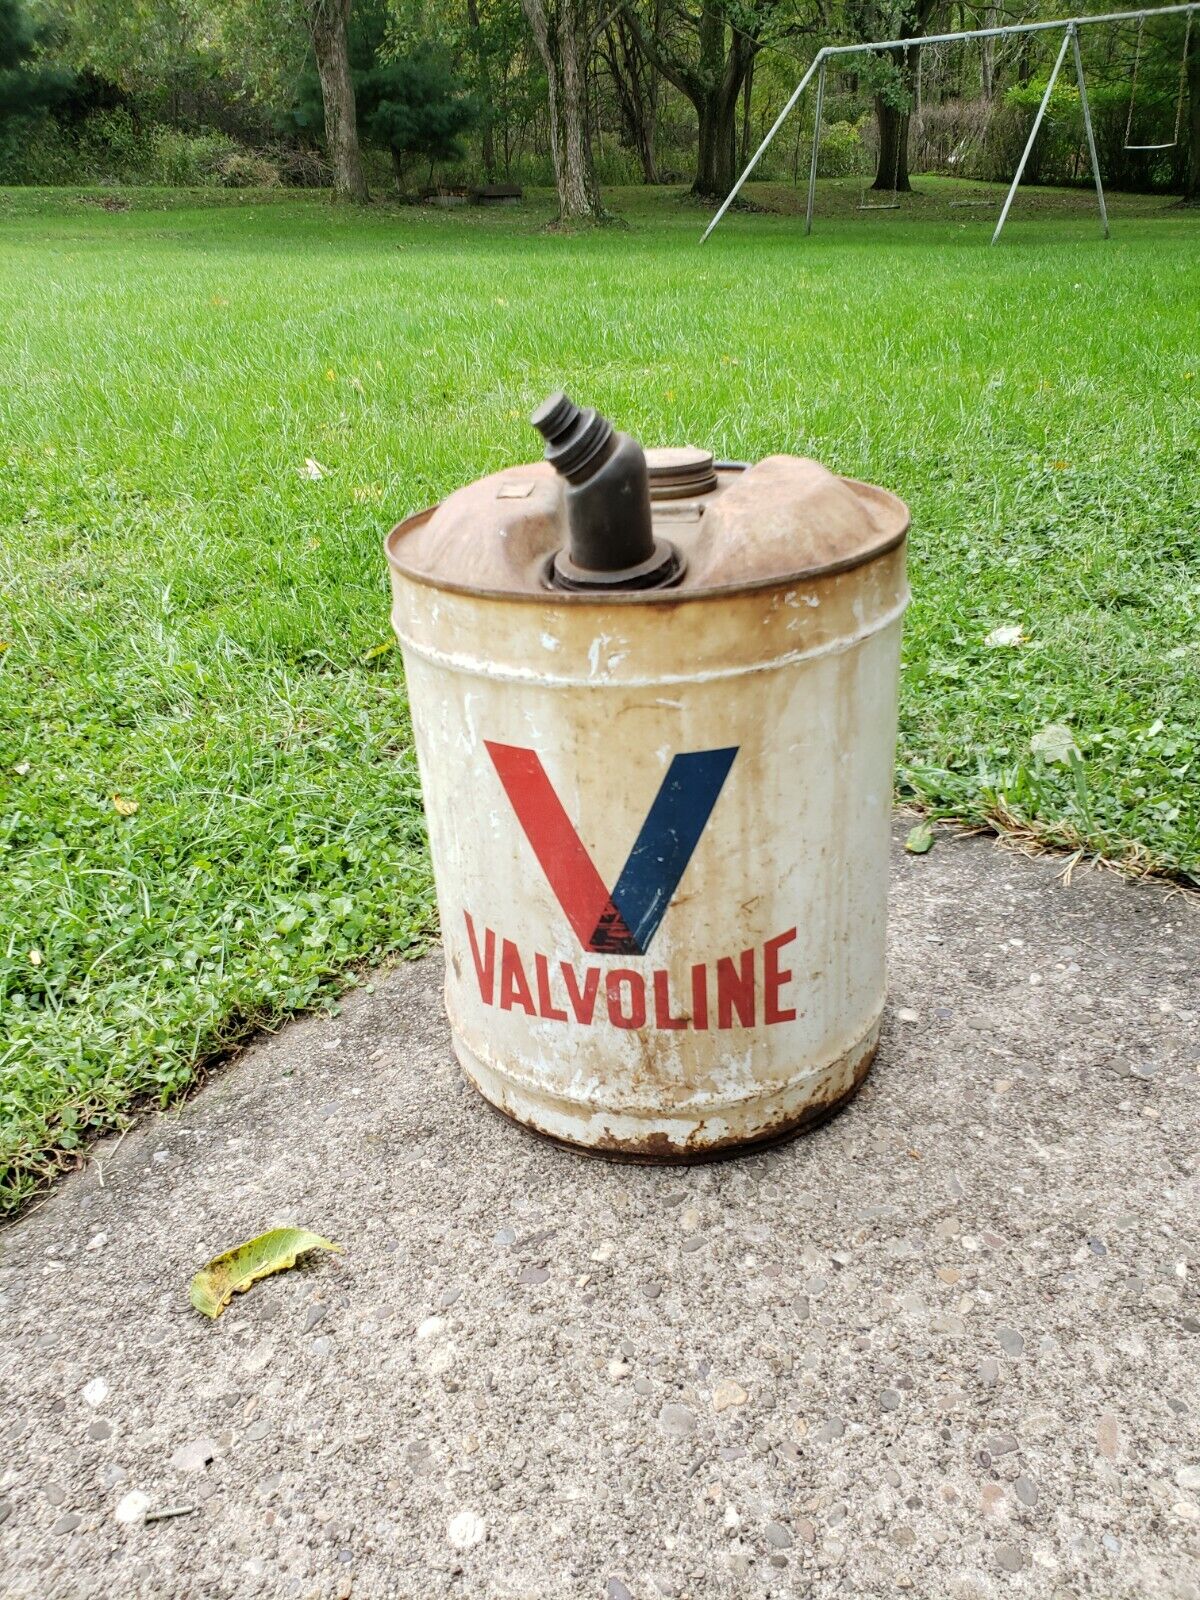 Vintage Valvoline 5 Gallon Non- Detergent Motor Oil Sae 20w Gas Can Advertising